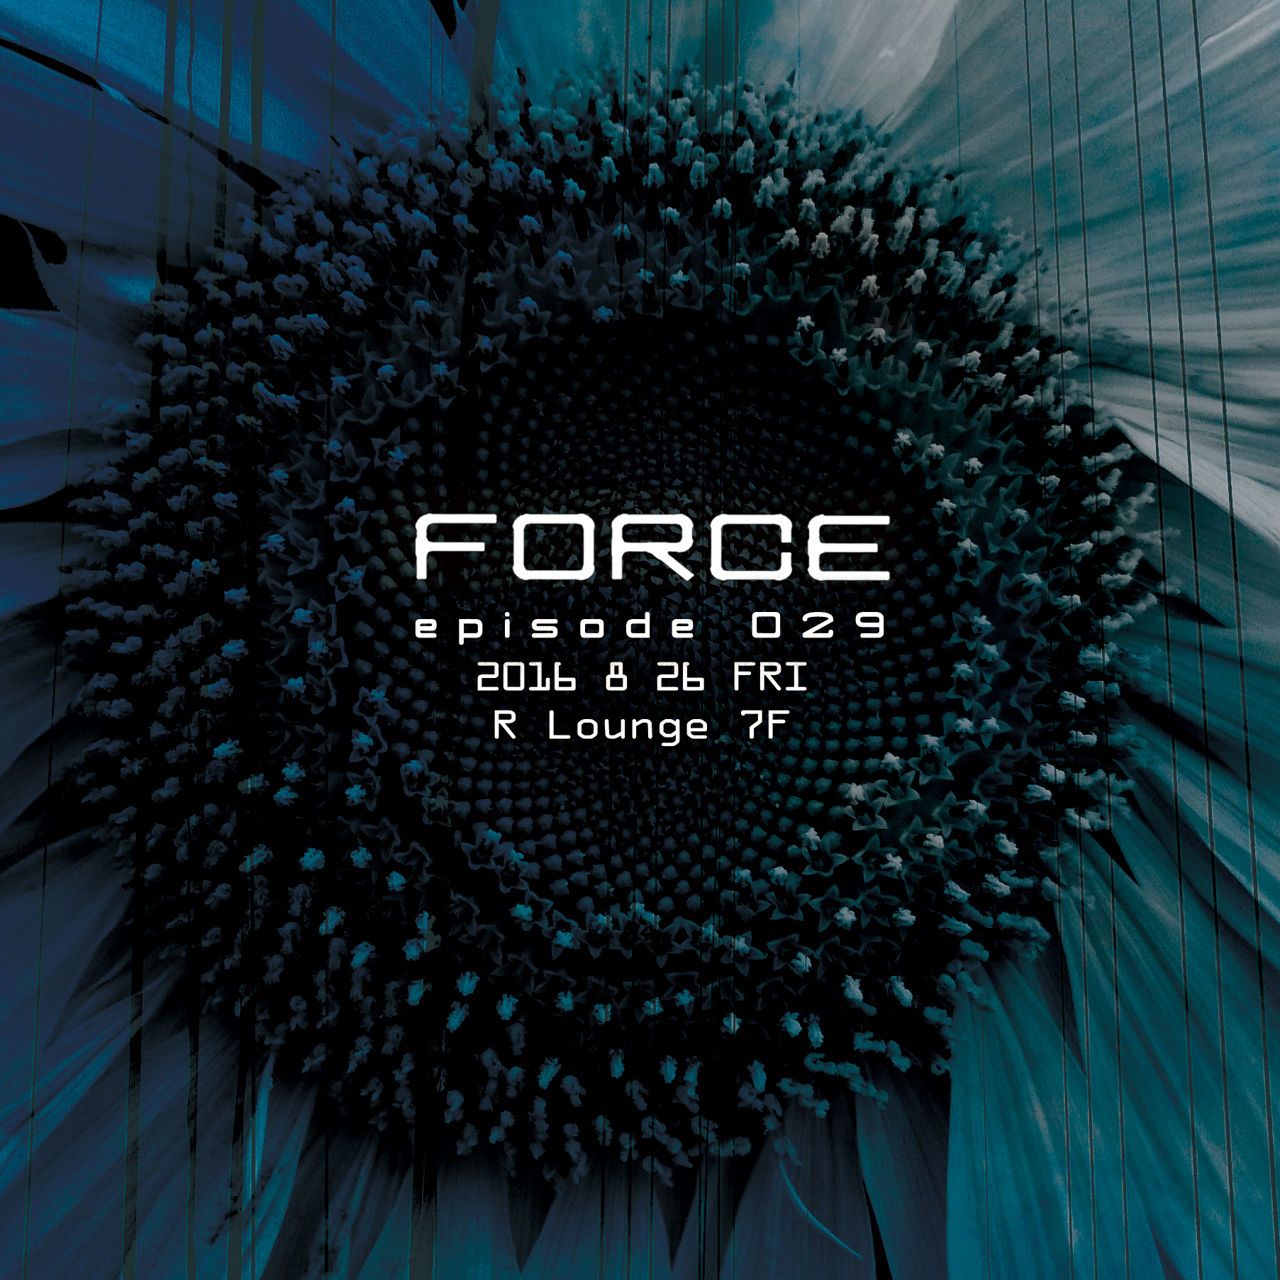 FORCE episode 029 (7F)